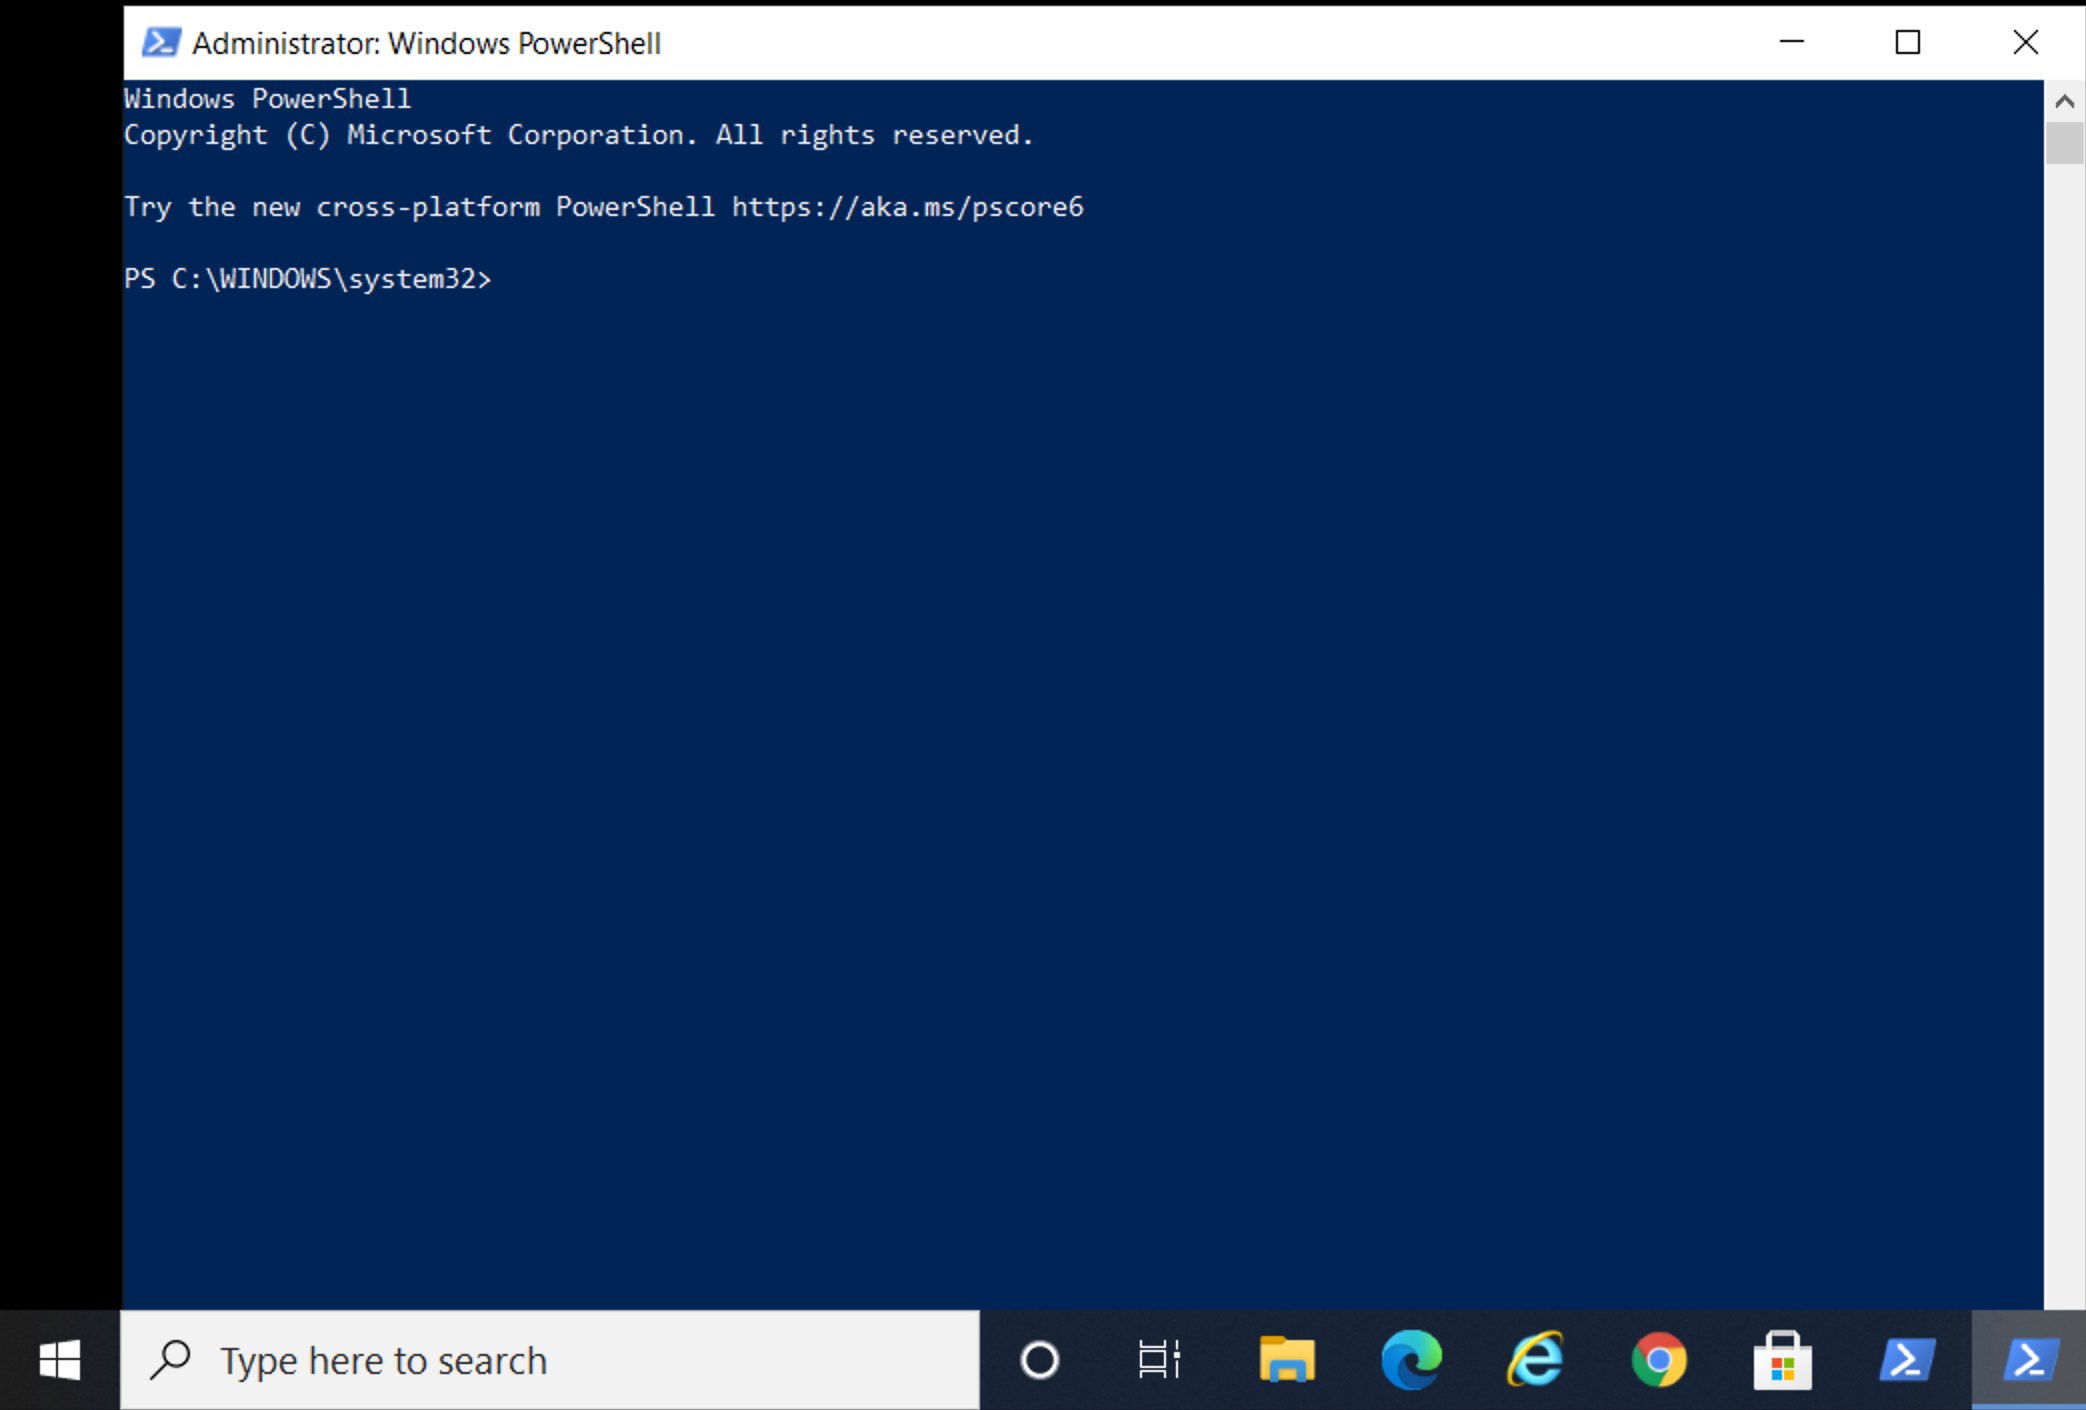 PowerShell Launches and presents as follows